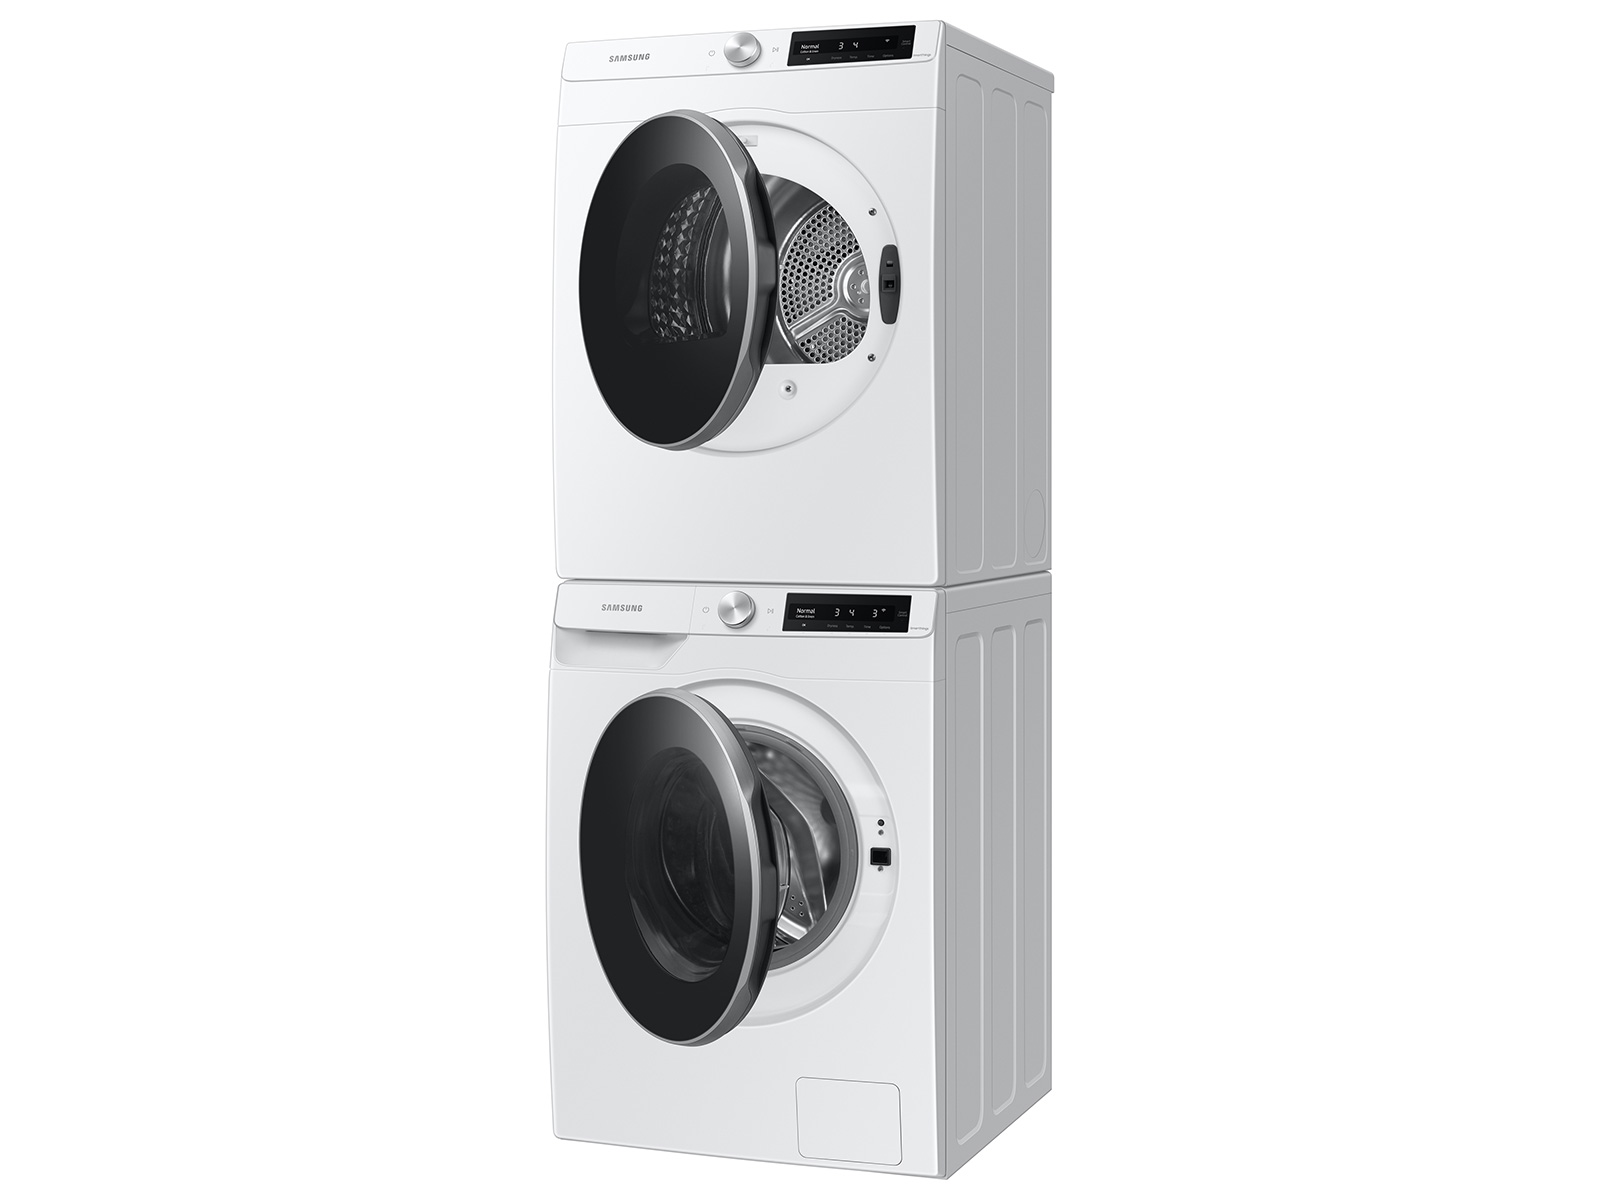 hOmeLabs Compact Front Loading Portable Laundry Dryer, White